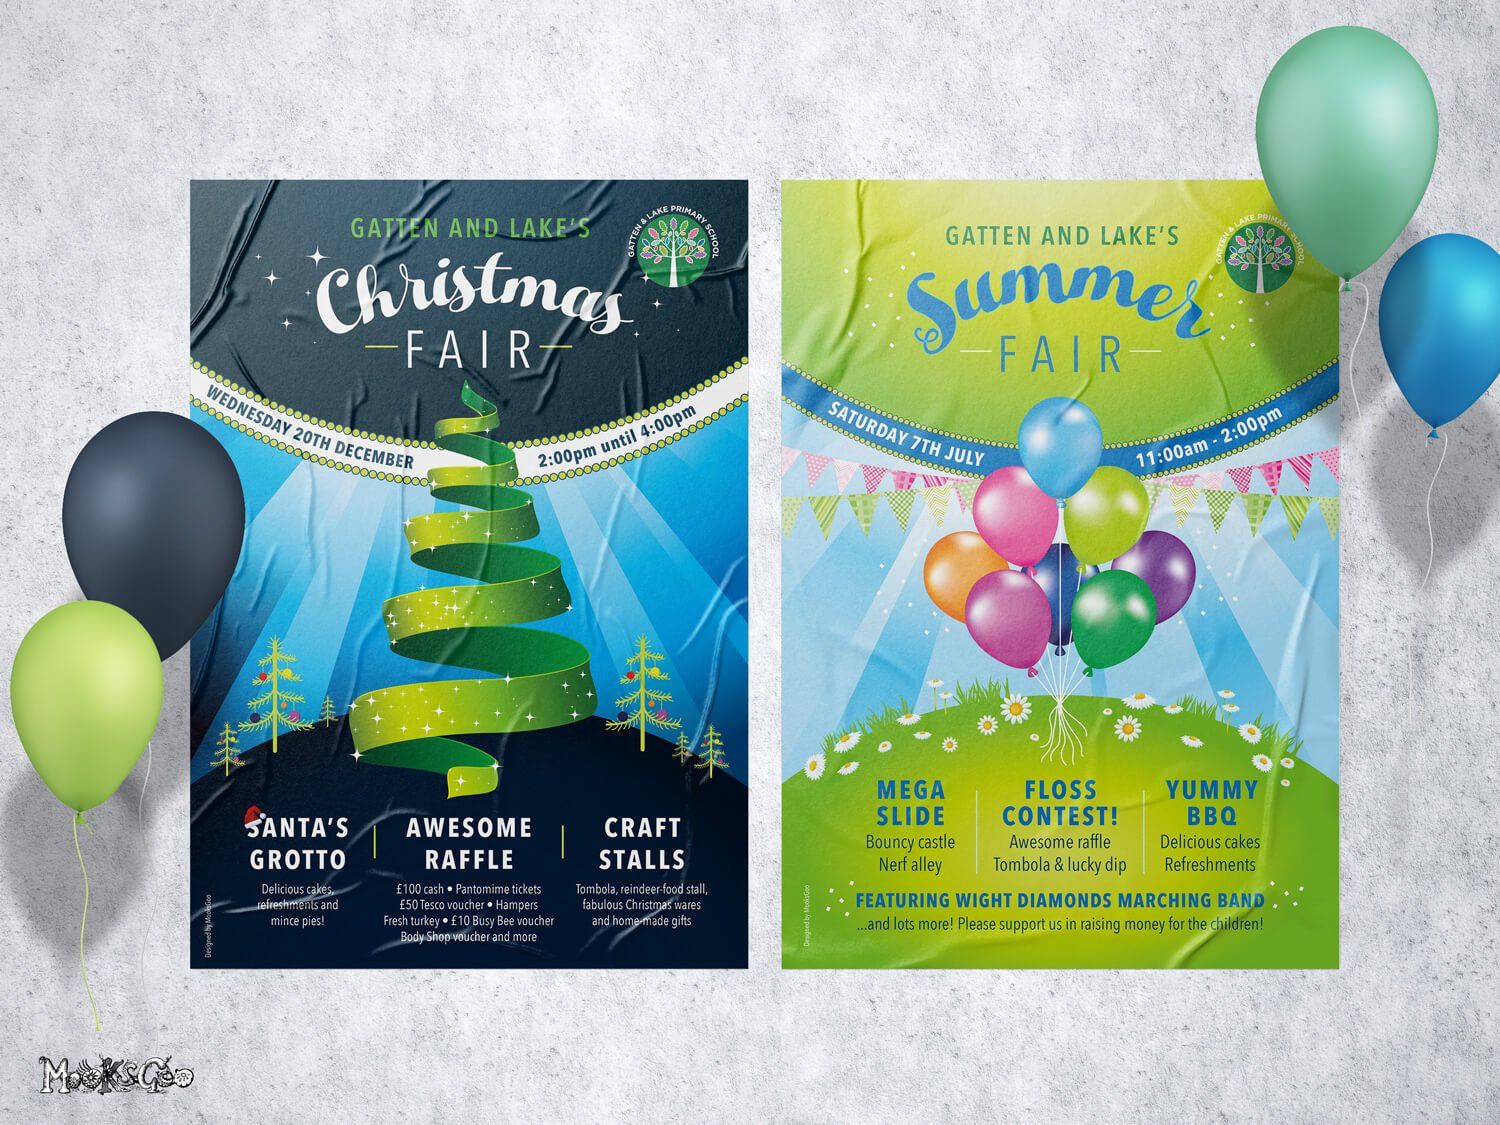 Bright and fun posters for a school fair, designed by MooksGoo